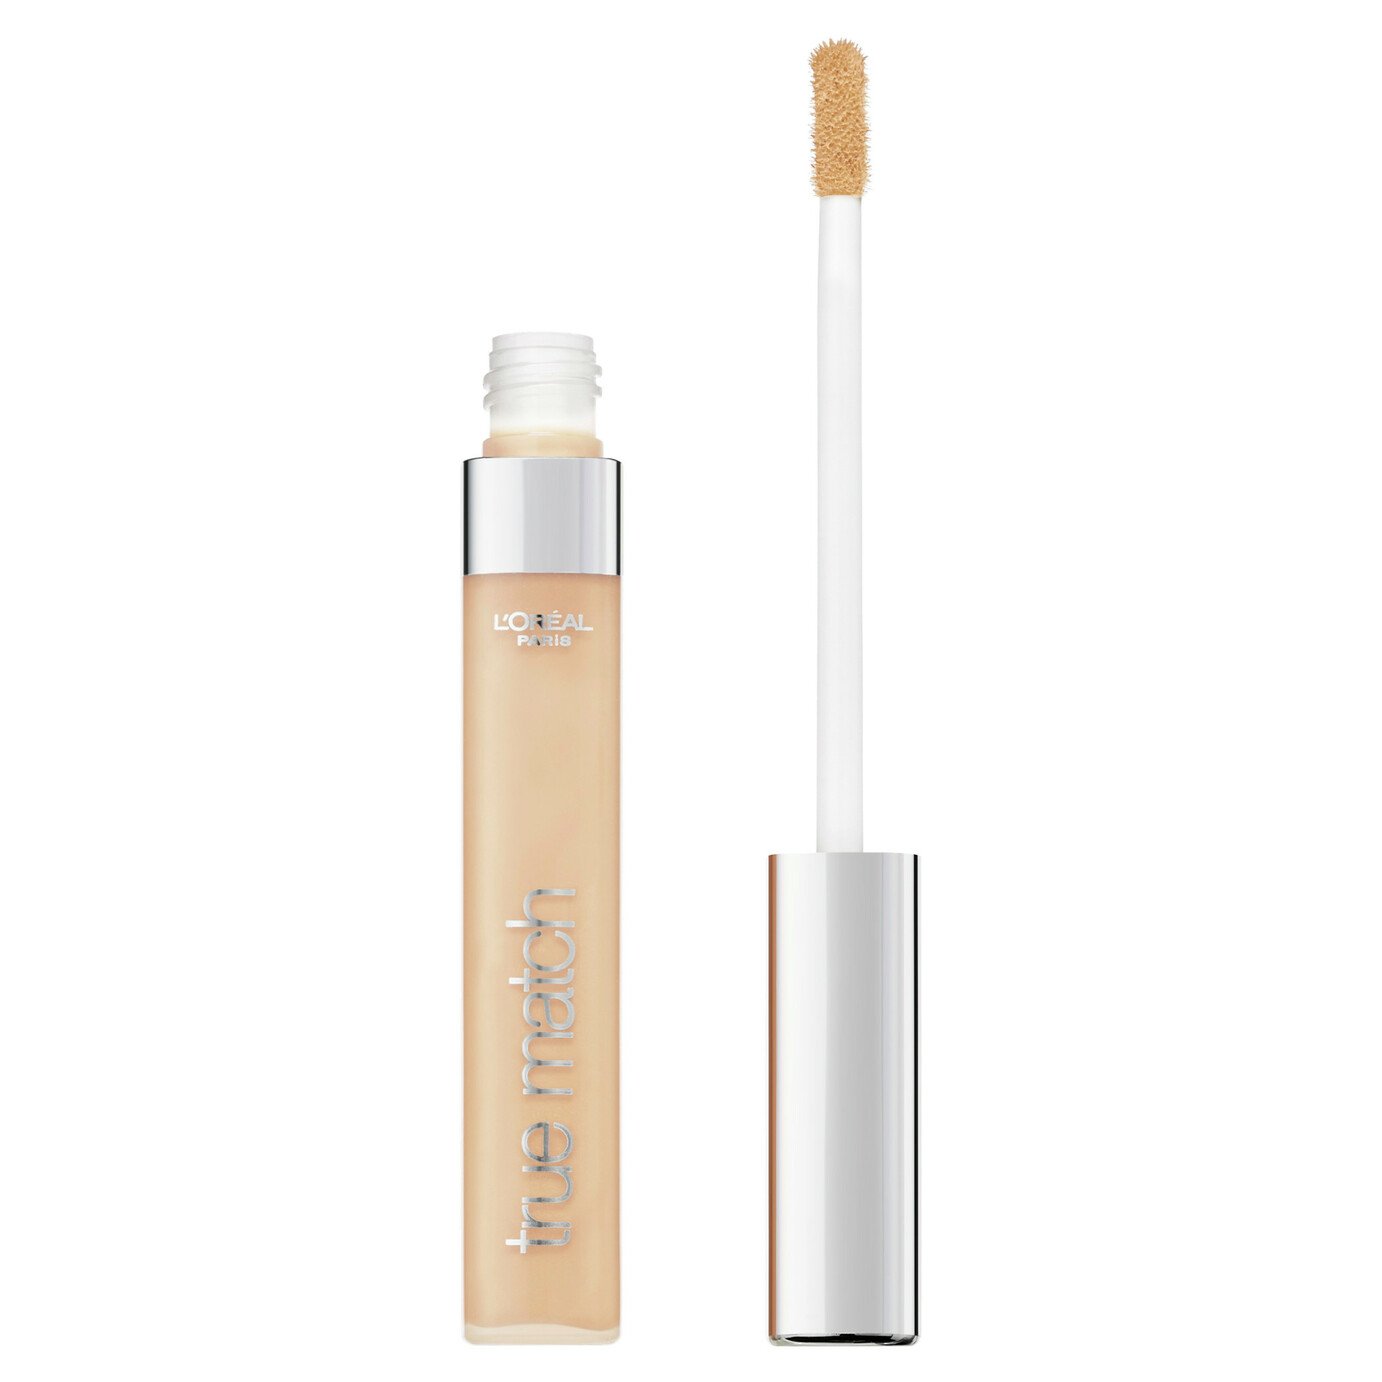 L'Oreal Paris True Match The One Concealer - Ivory Rose